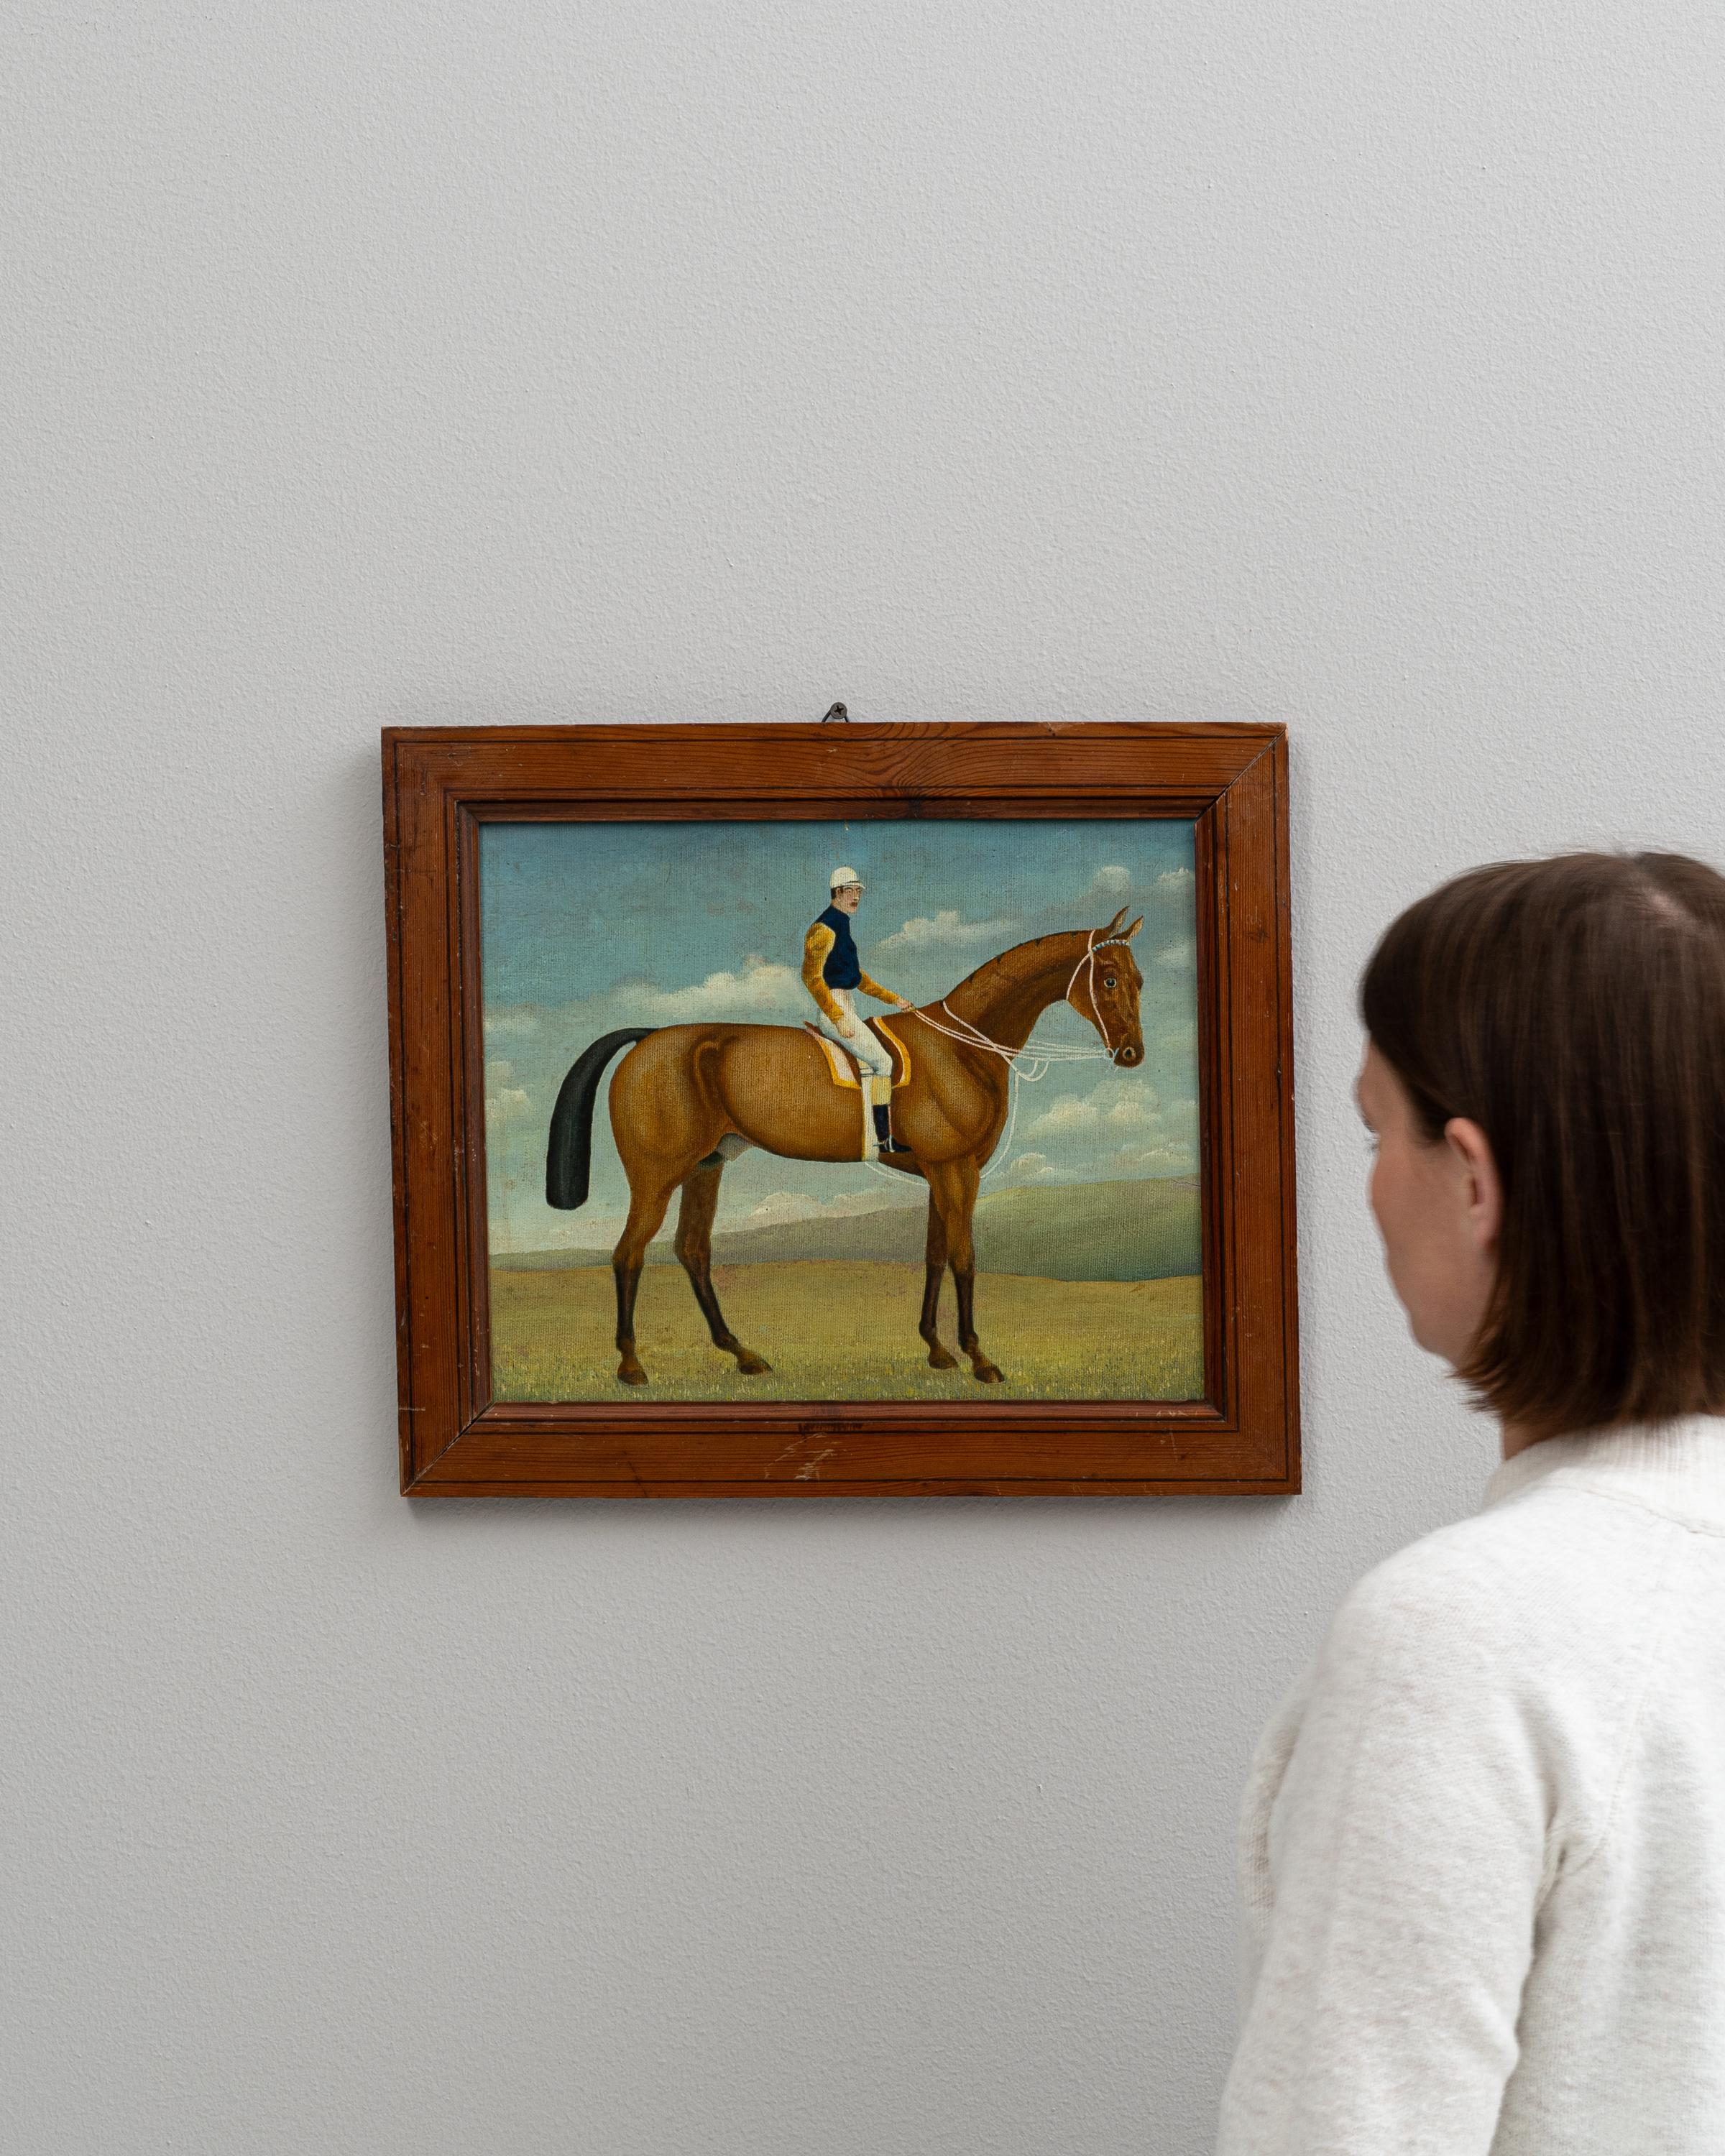 Add a touch of British elegance to your space with this 19th-century painting, showcasing an exquisitely detailed depiction of a horse and rider set against a serene landscape. The rider, attired in classic equestrian gear, complements the graceful